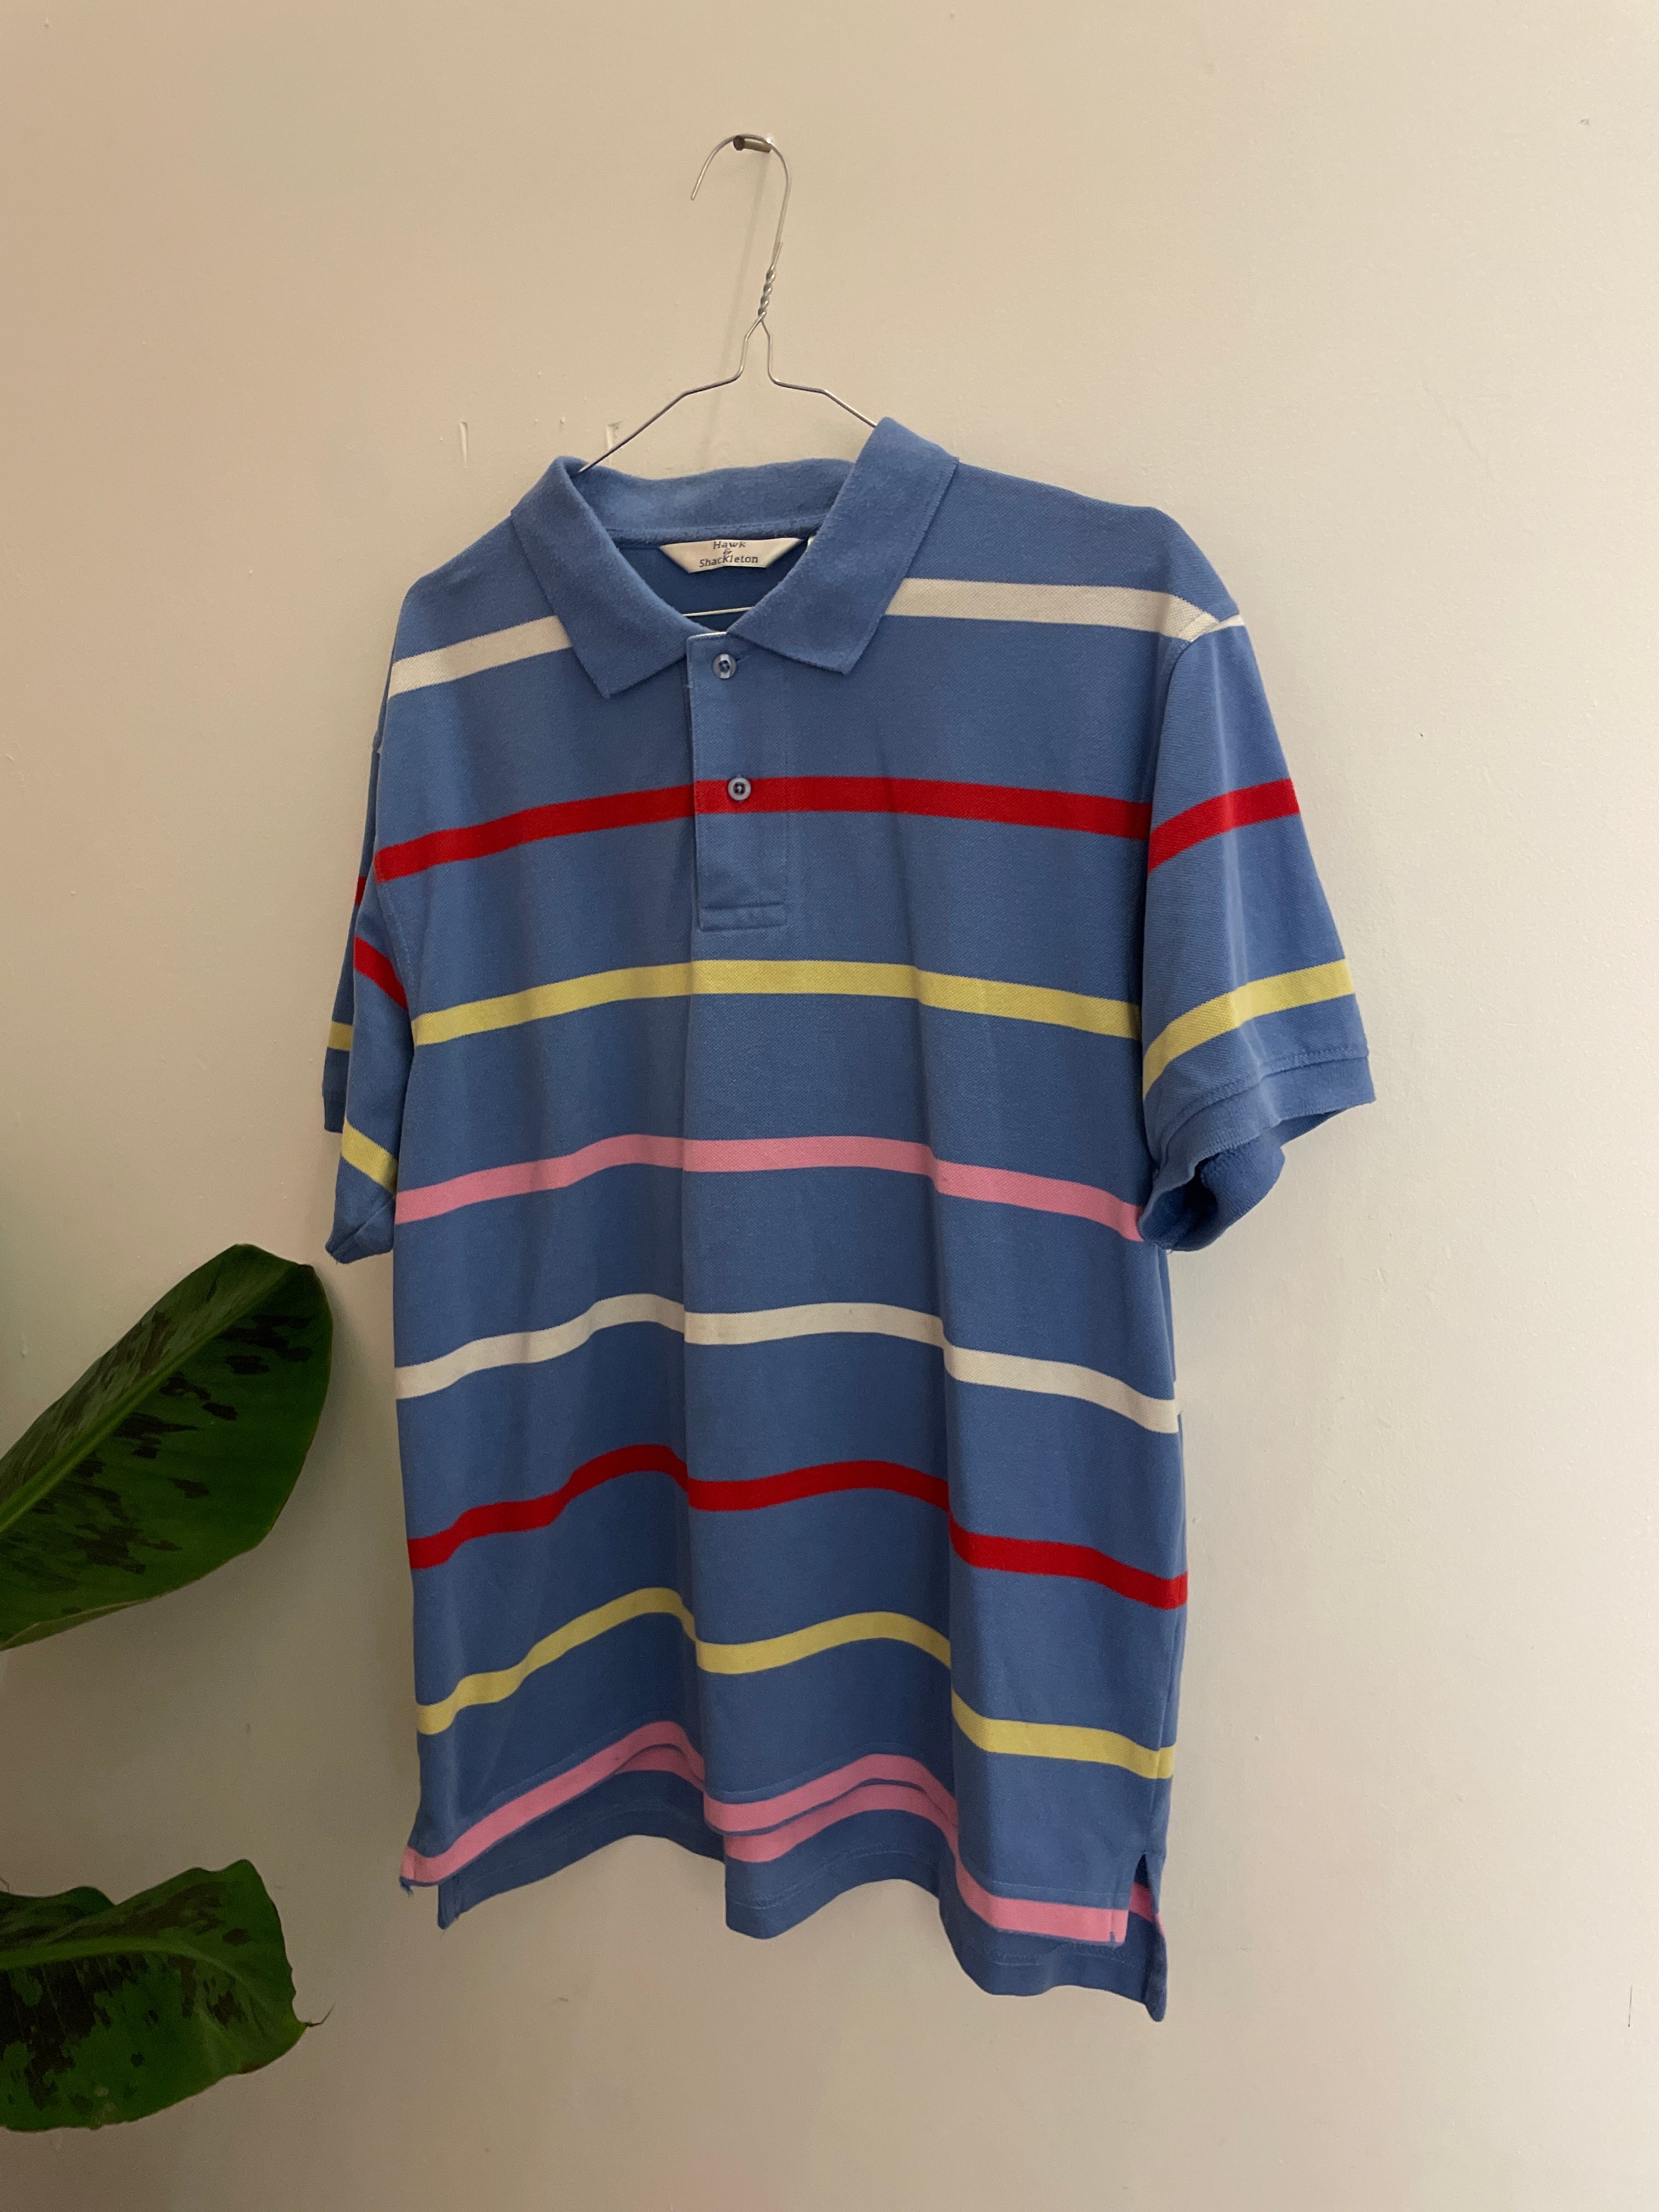 Vintage hawk and shackleton blue stripped mens polo shirt size L